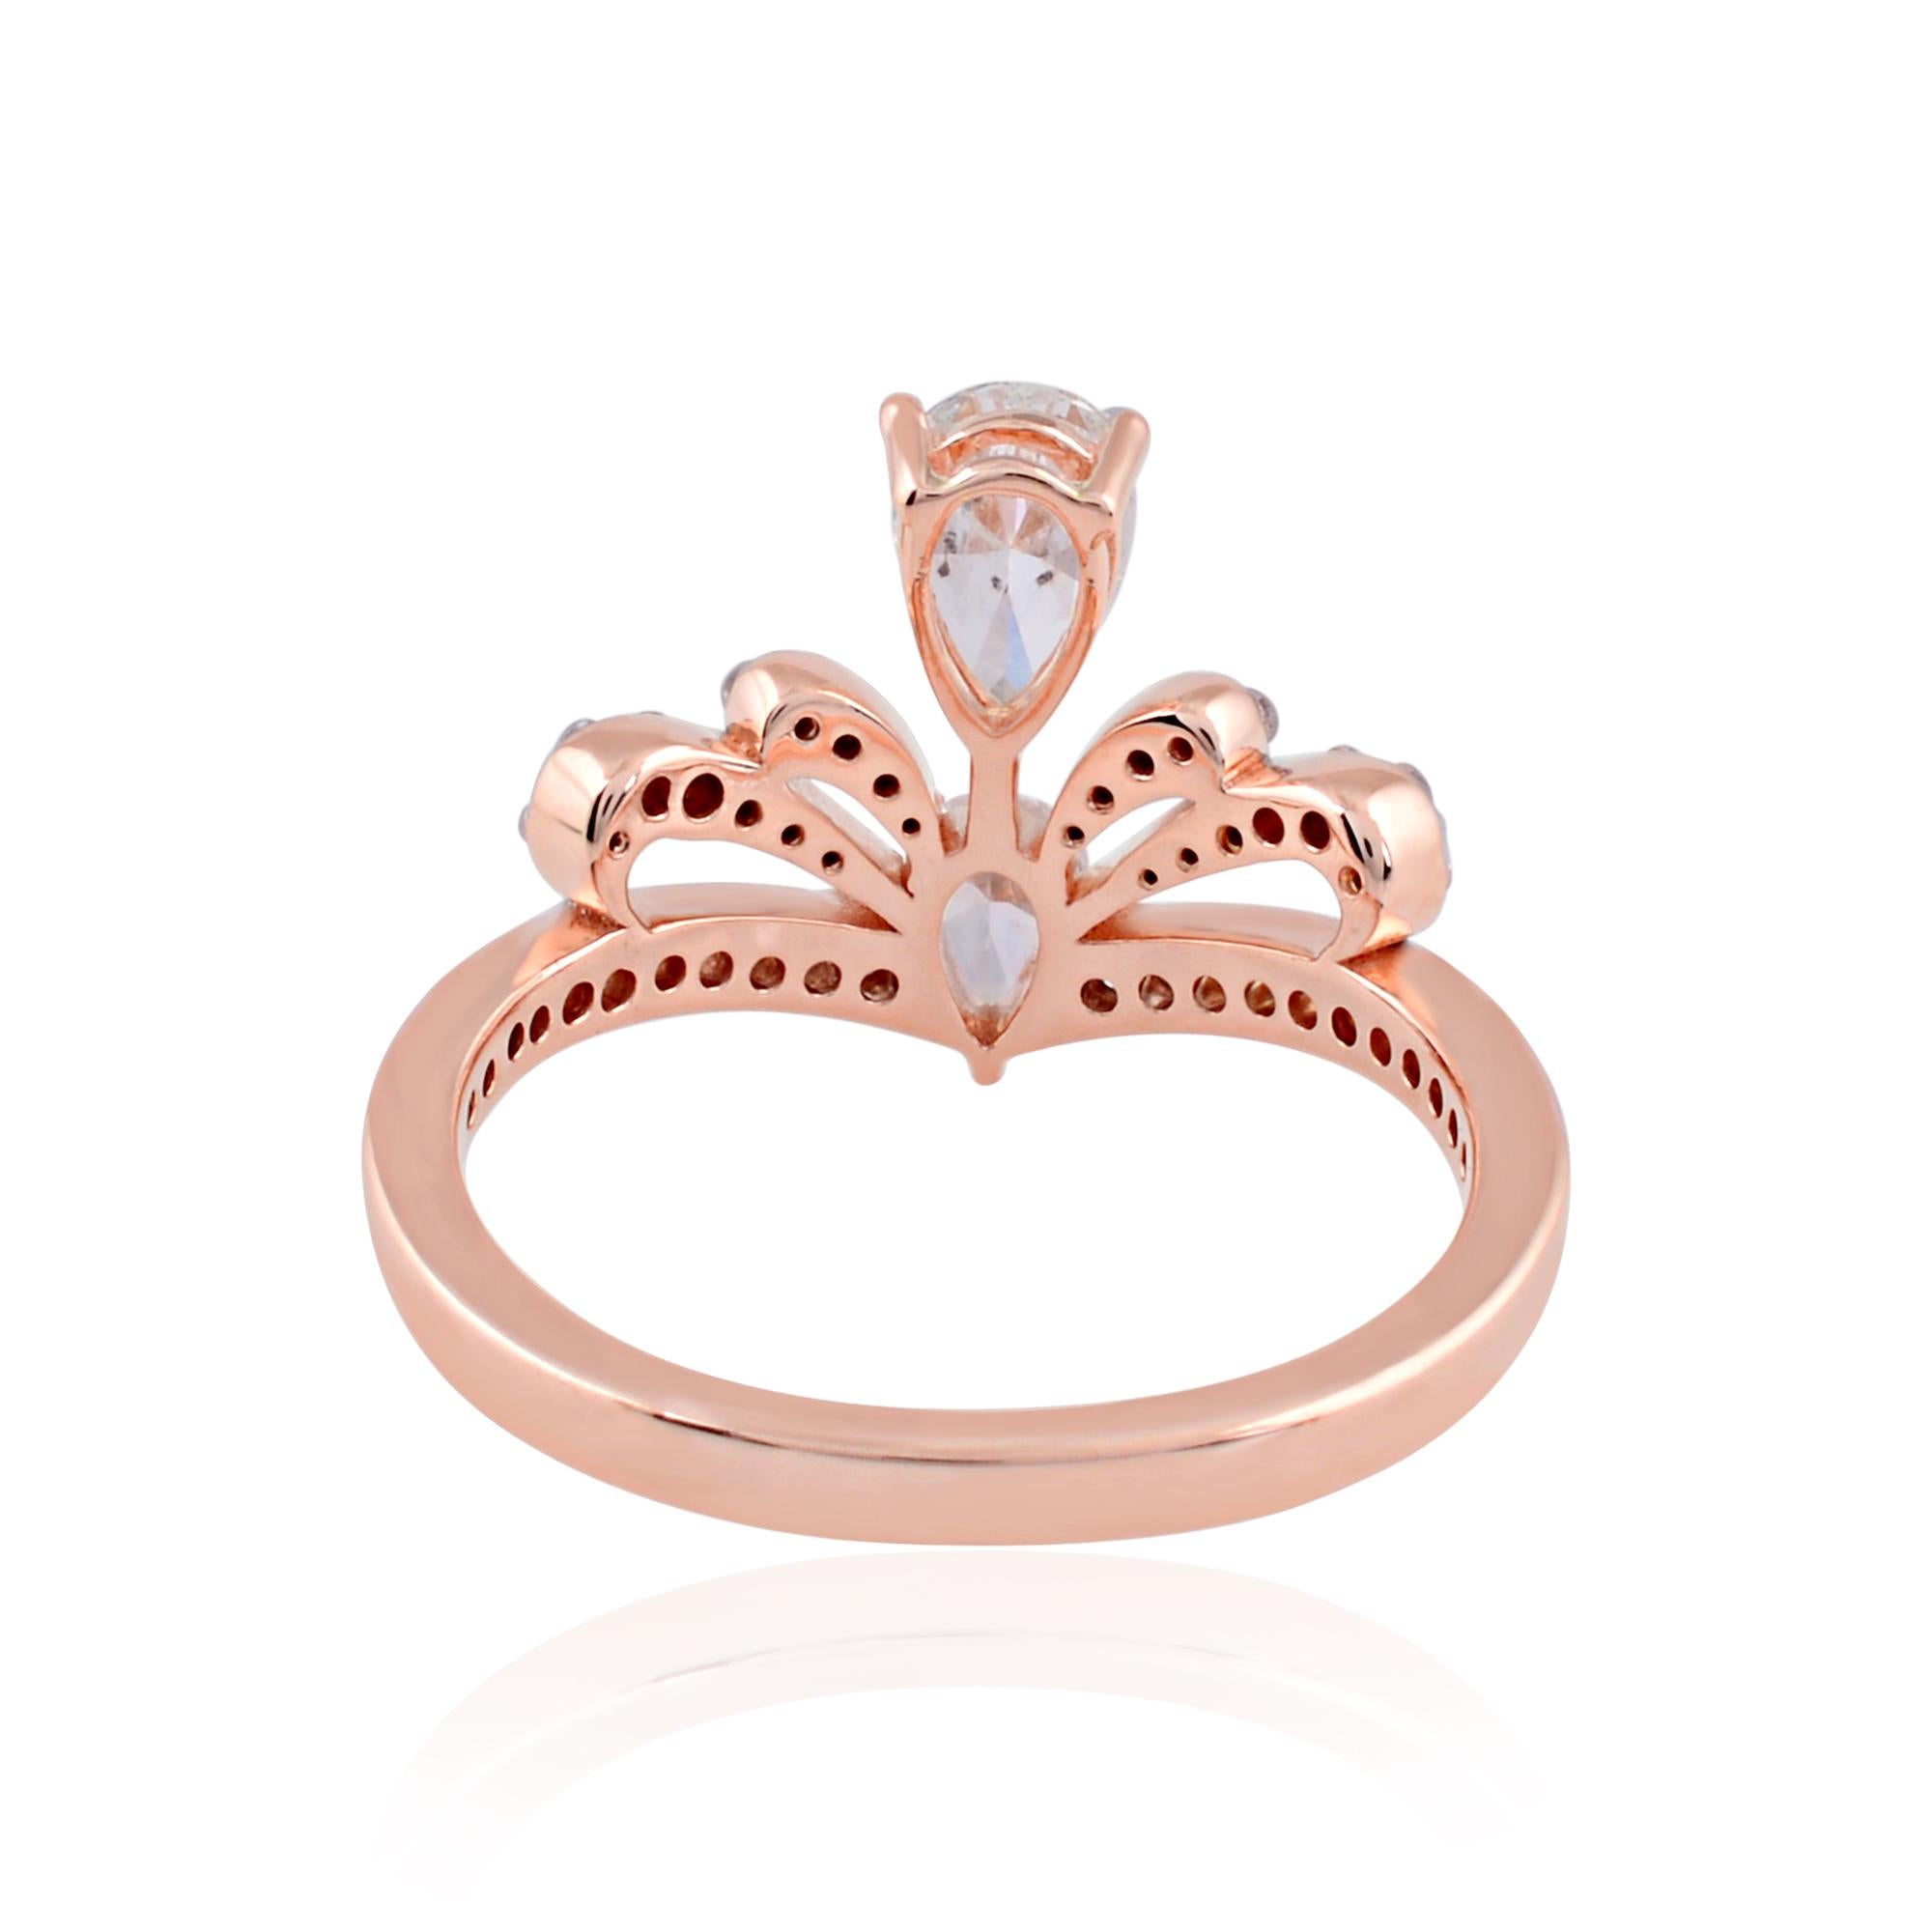 For Sale:  0.9 Carat SI Clarity HI Color Pear Diamond Crown Ring 18 Karat Rose Gold Jewelry 3